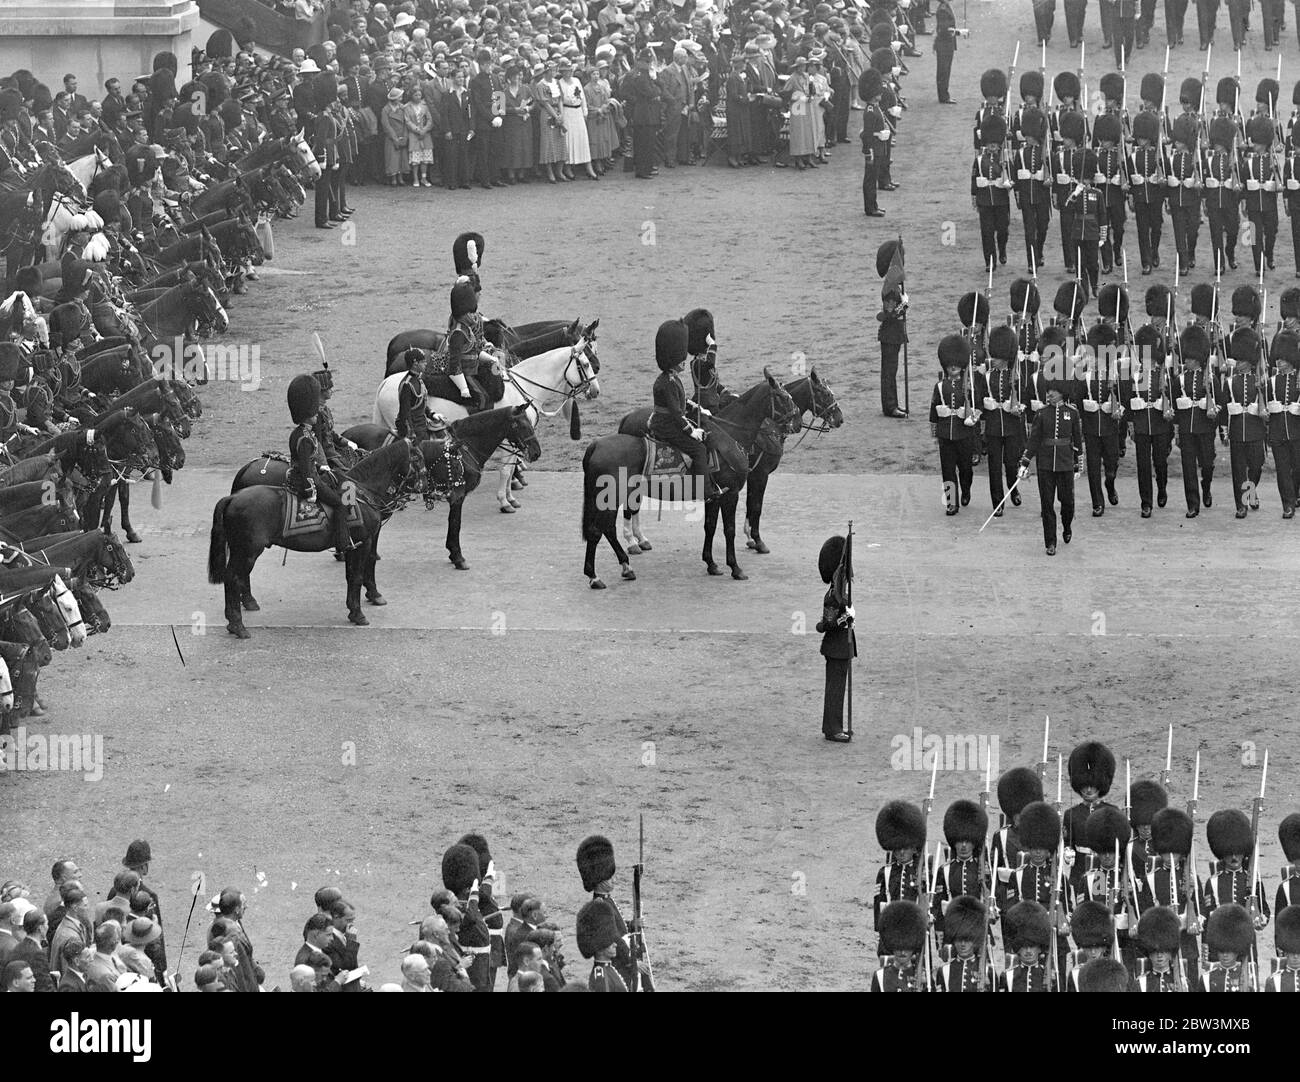 King At First Trooping Of The Colour As Monarch For the first time as monarch King Edward VIII took part in the Trooping of the Colour ceremony at the Horse Guards Parade in honour of his 42 nd birthday . His Brother the Duke of York , The Royal Dukes , the military attaches of Foreign Powers and Colonels of the Guards Regiments accompanied him om horseback . Photo Shows : A general view as the King inspected the Guards . 23 Jun 1936 Stock Photo